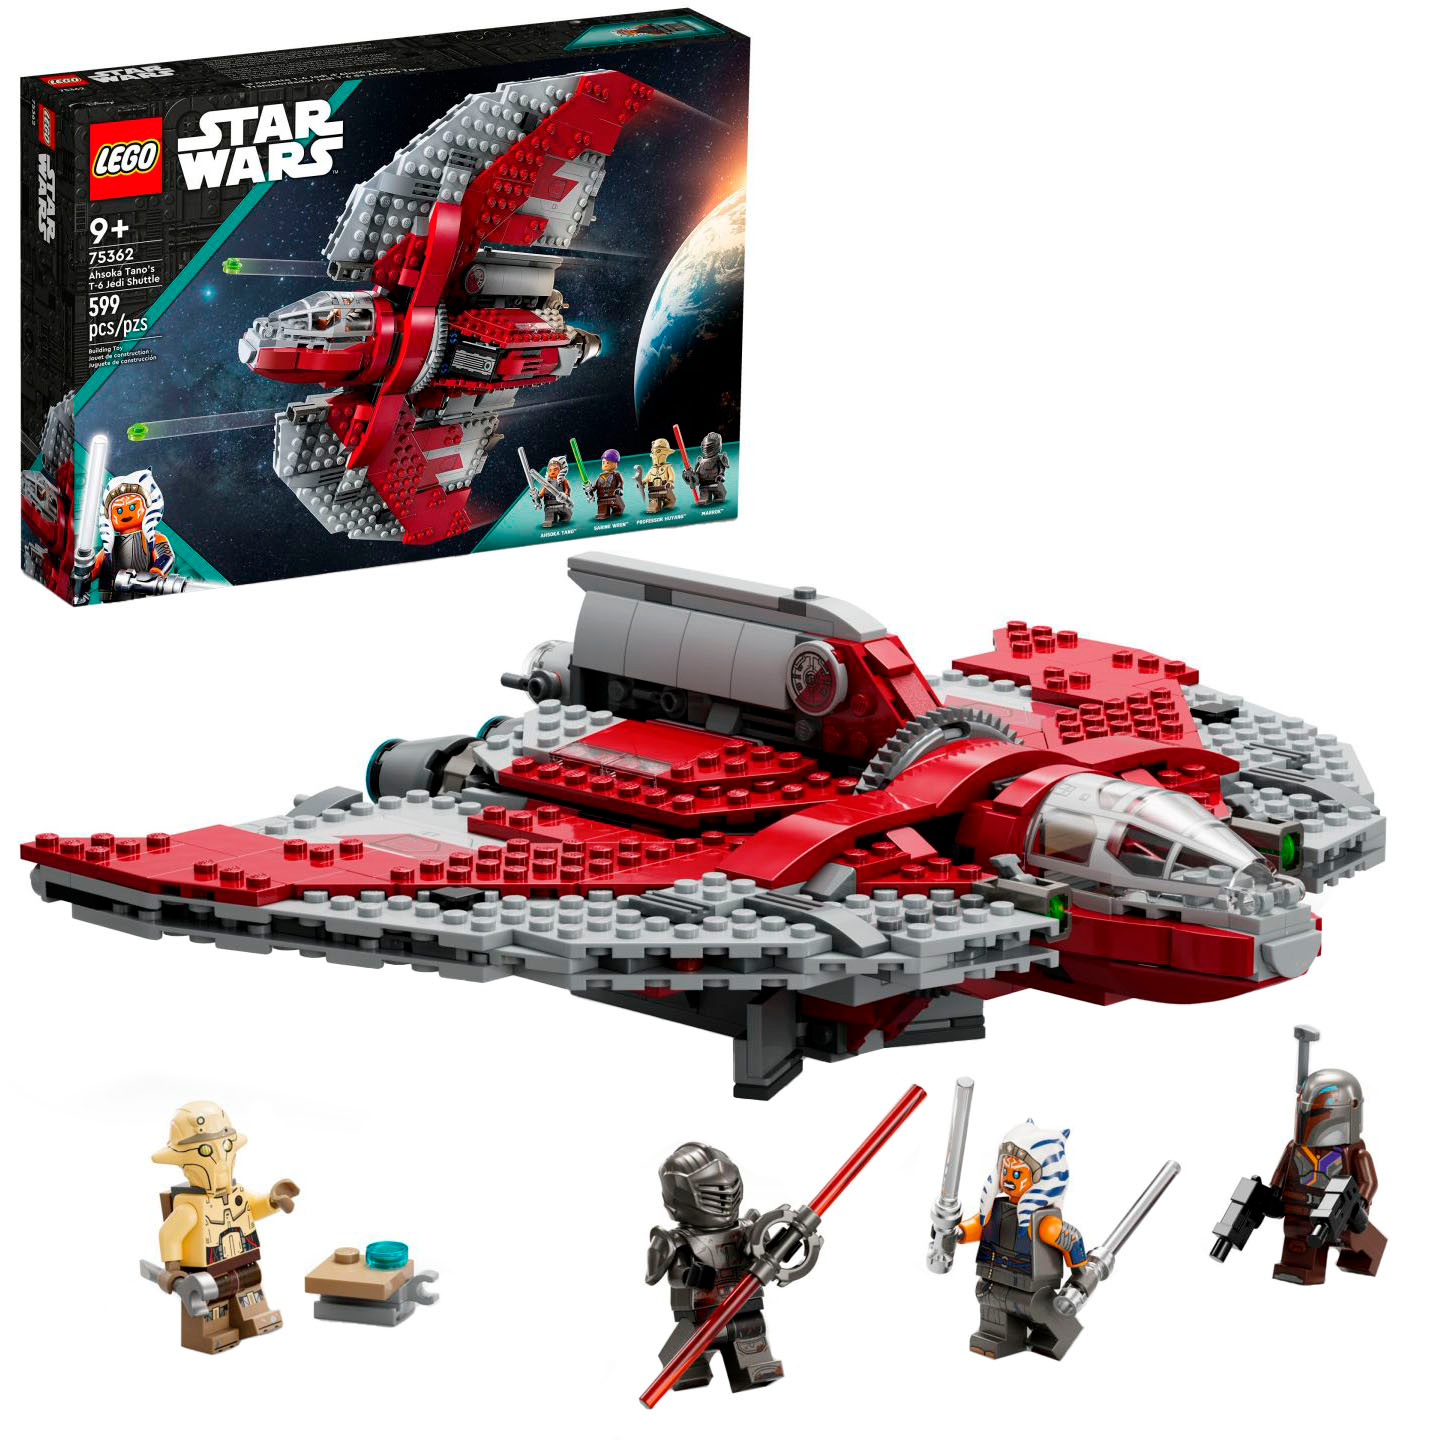 Check out LEGO's Star Wars: The Last Jedi sets